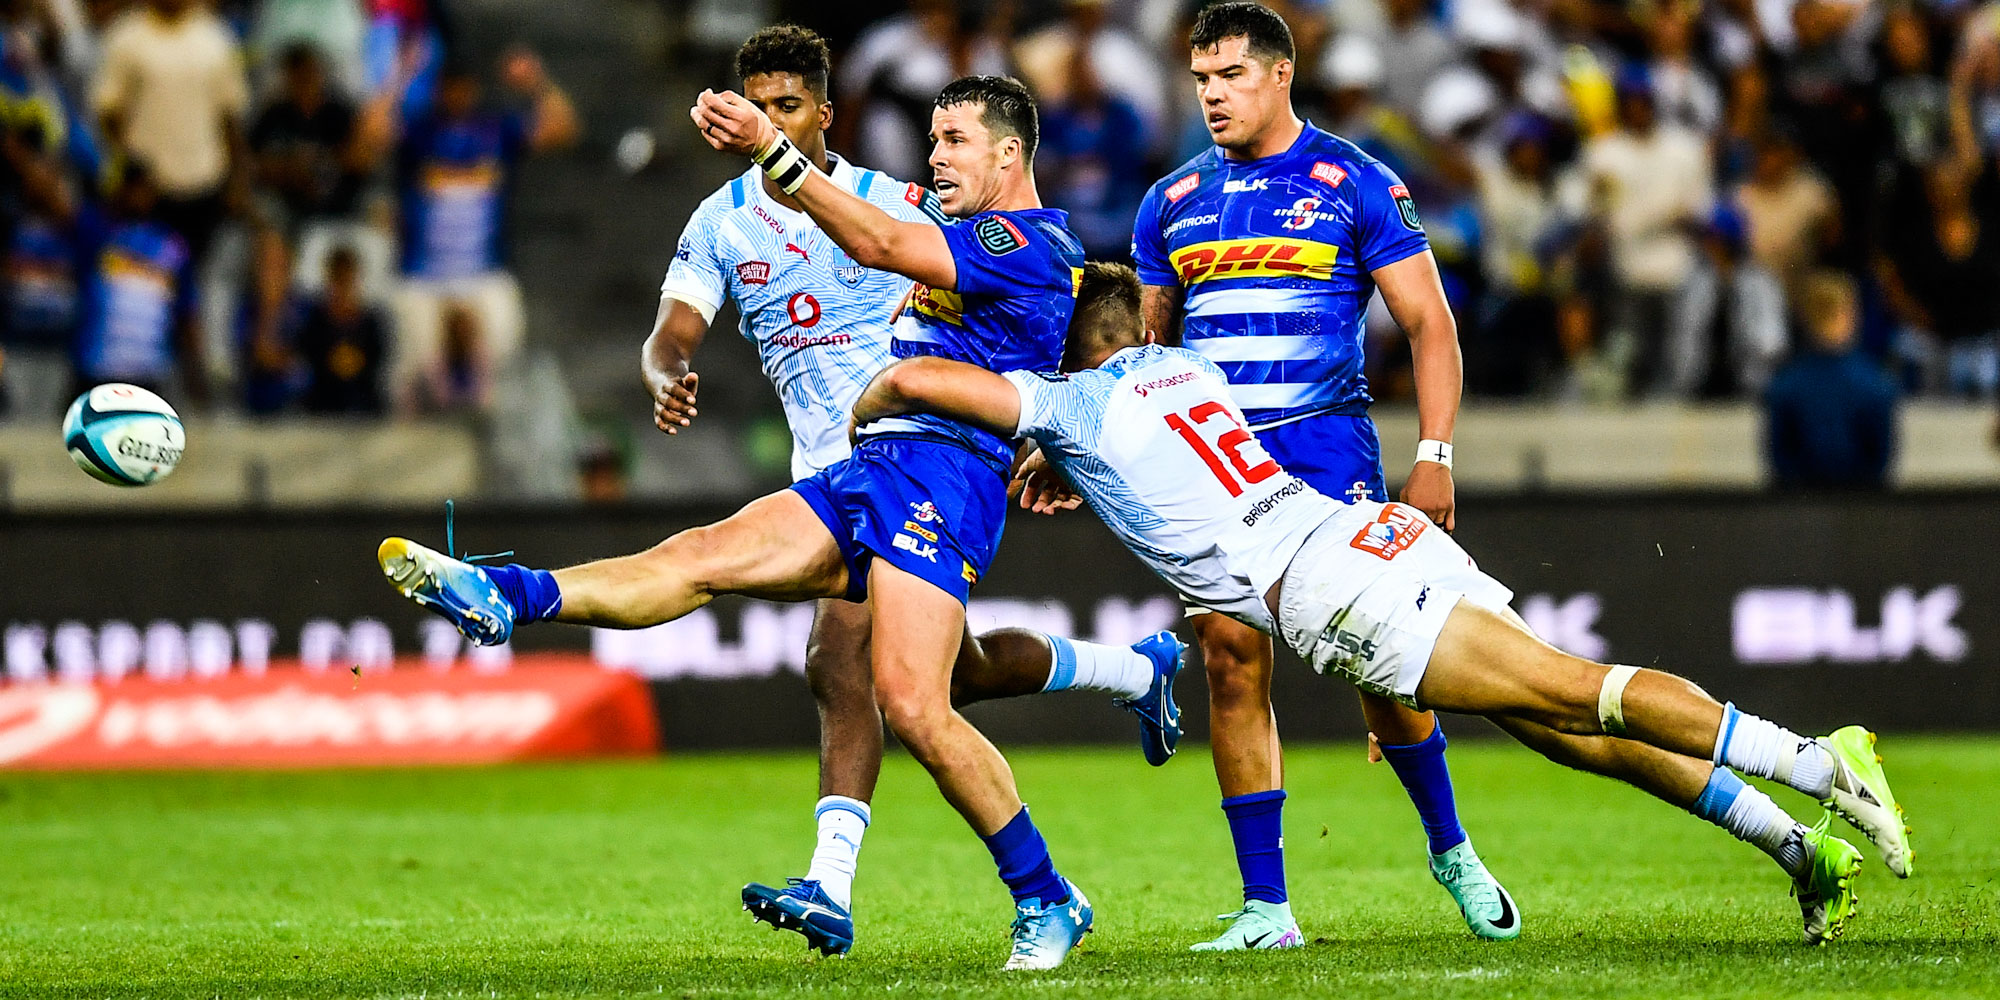 Action from the last clash between the DHL Stormers and the Vodacom Bulls.